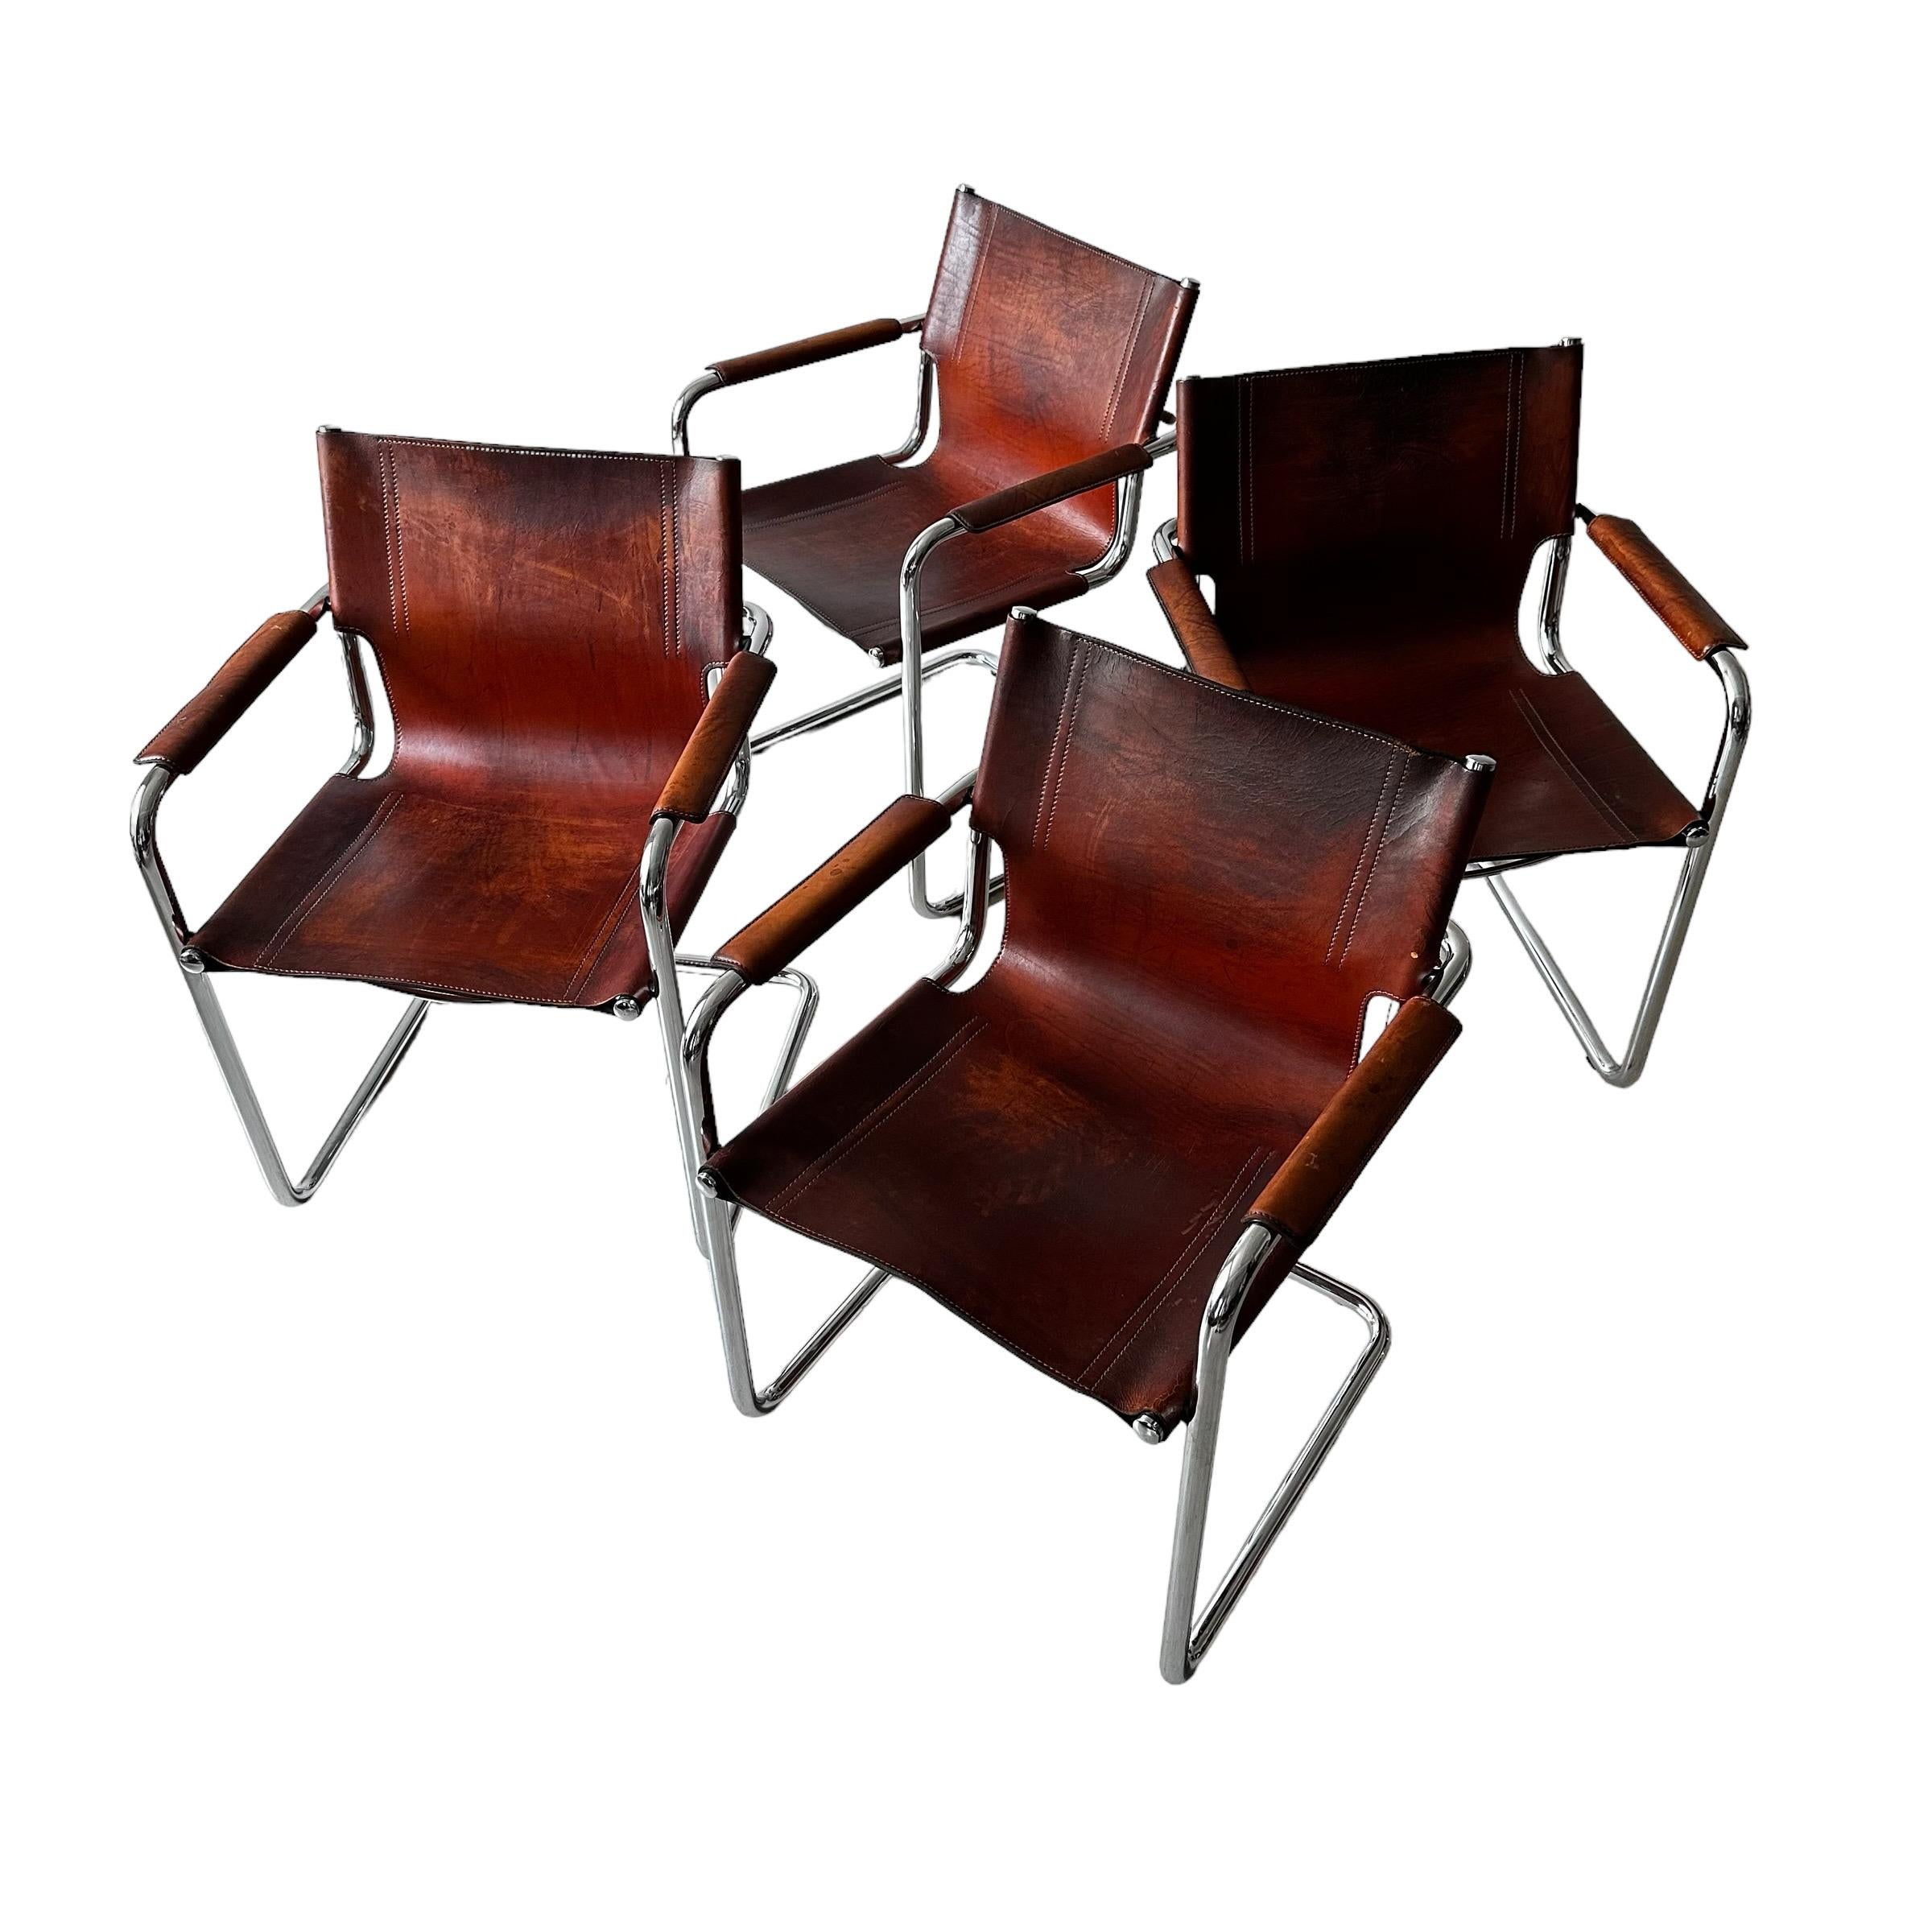 Rare set of 4 cantilever armchairs in very patinated cognac leather by Matteo Grassi. Amazing patina that is so sought after and impossible to re-create. Made in Italy in the 1970s.